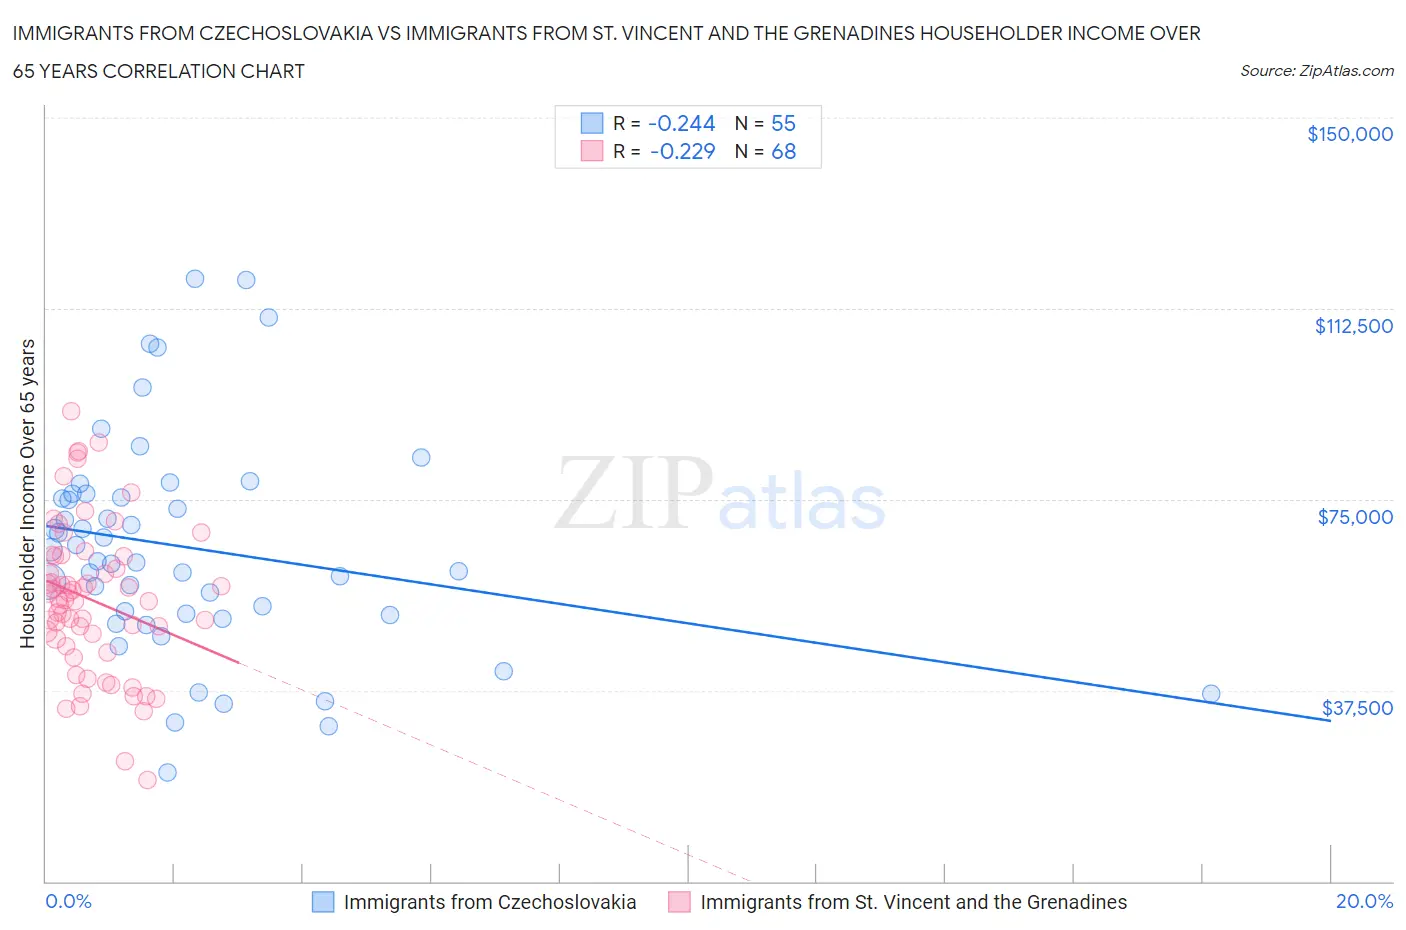 Immigrants from Czechoslovakia vs Immigrants from St. Vincent and the Grenadines Householder Income Over 65 years